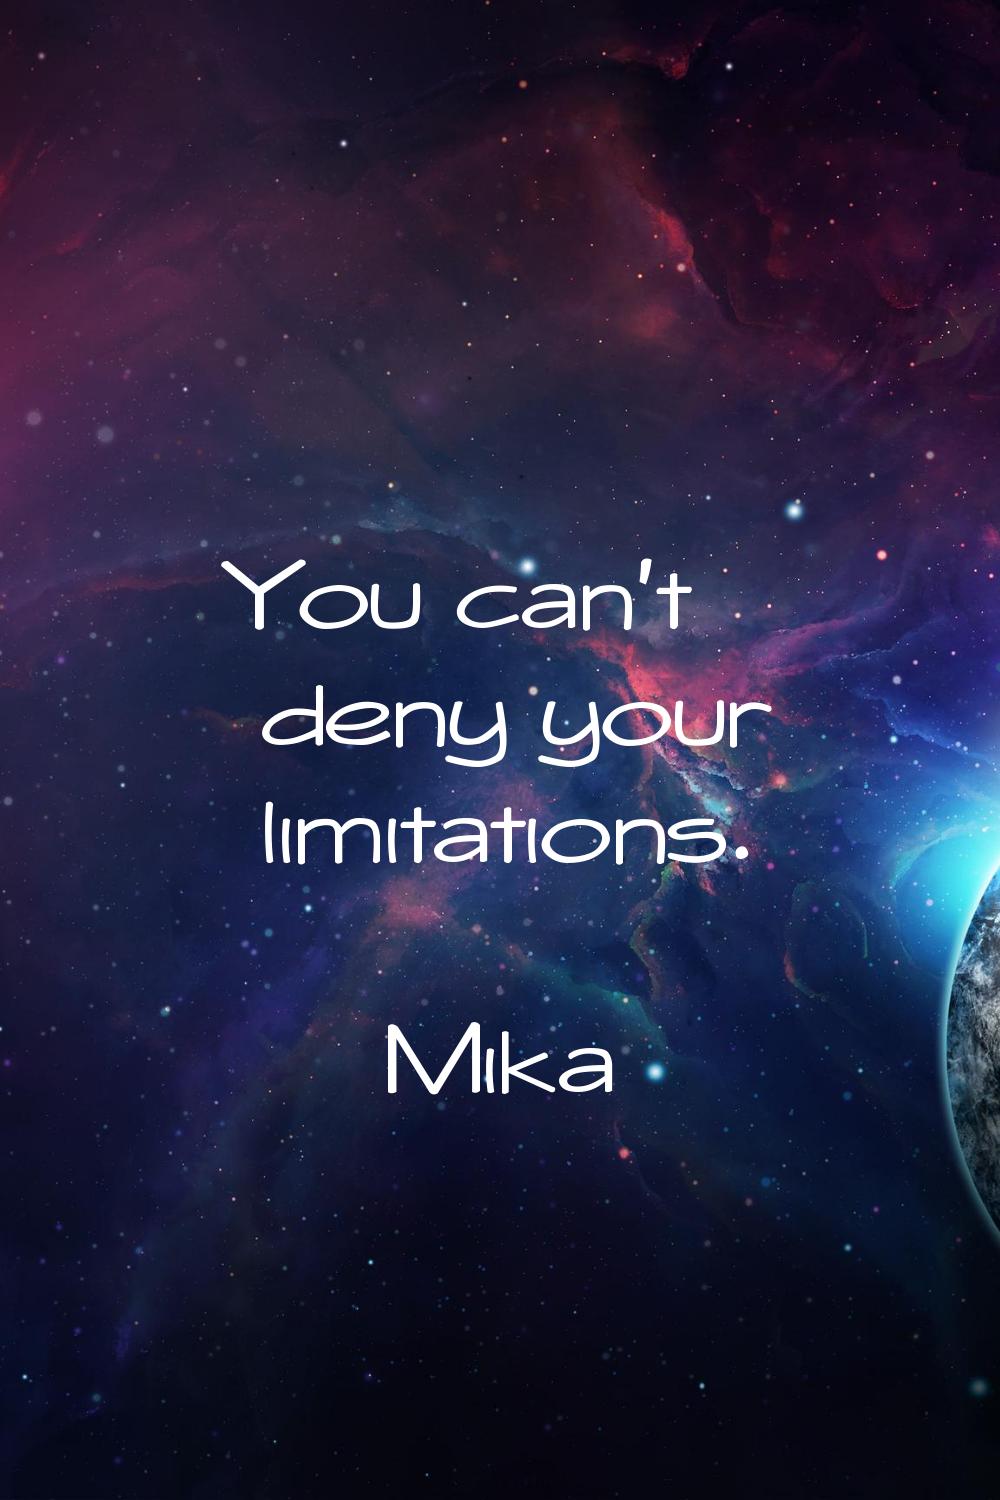 You can't deny your limitations.